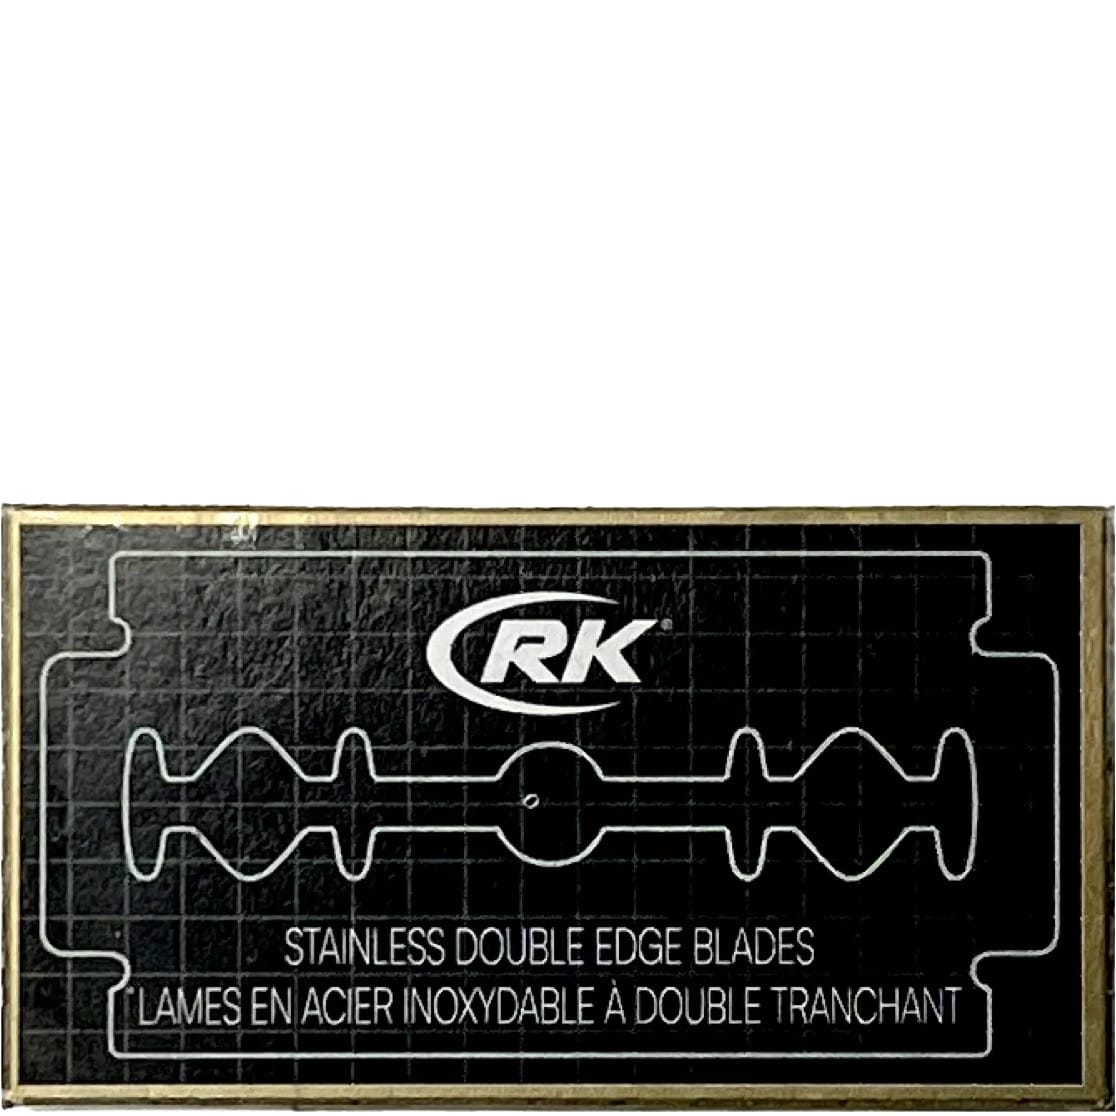 RK Stainless Double Edge blades - 1.5 - DEB-RK-STAINLESS